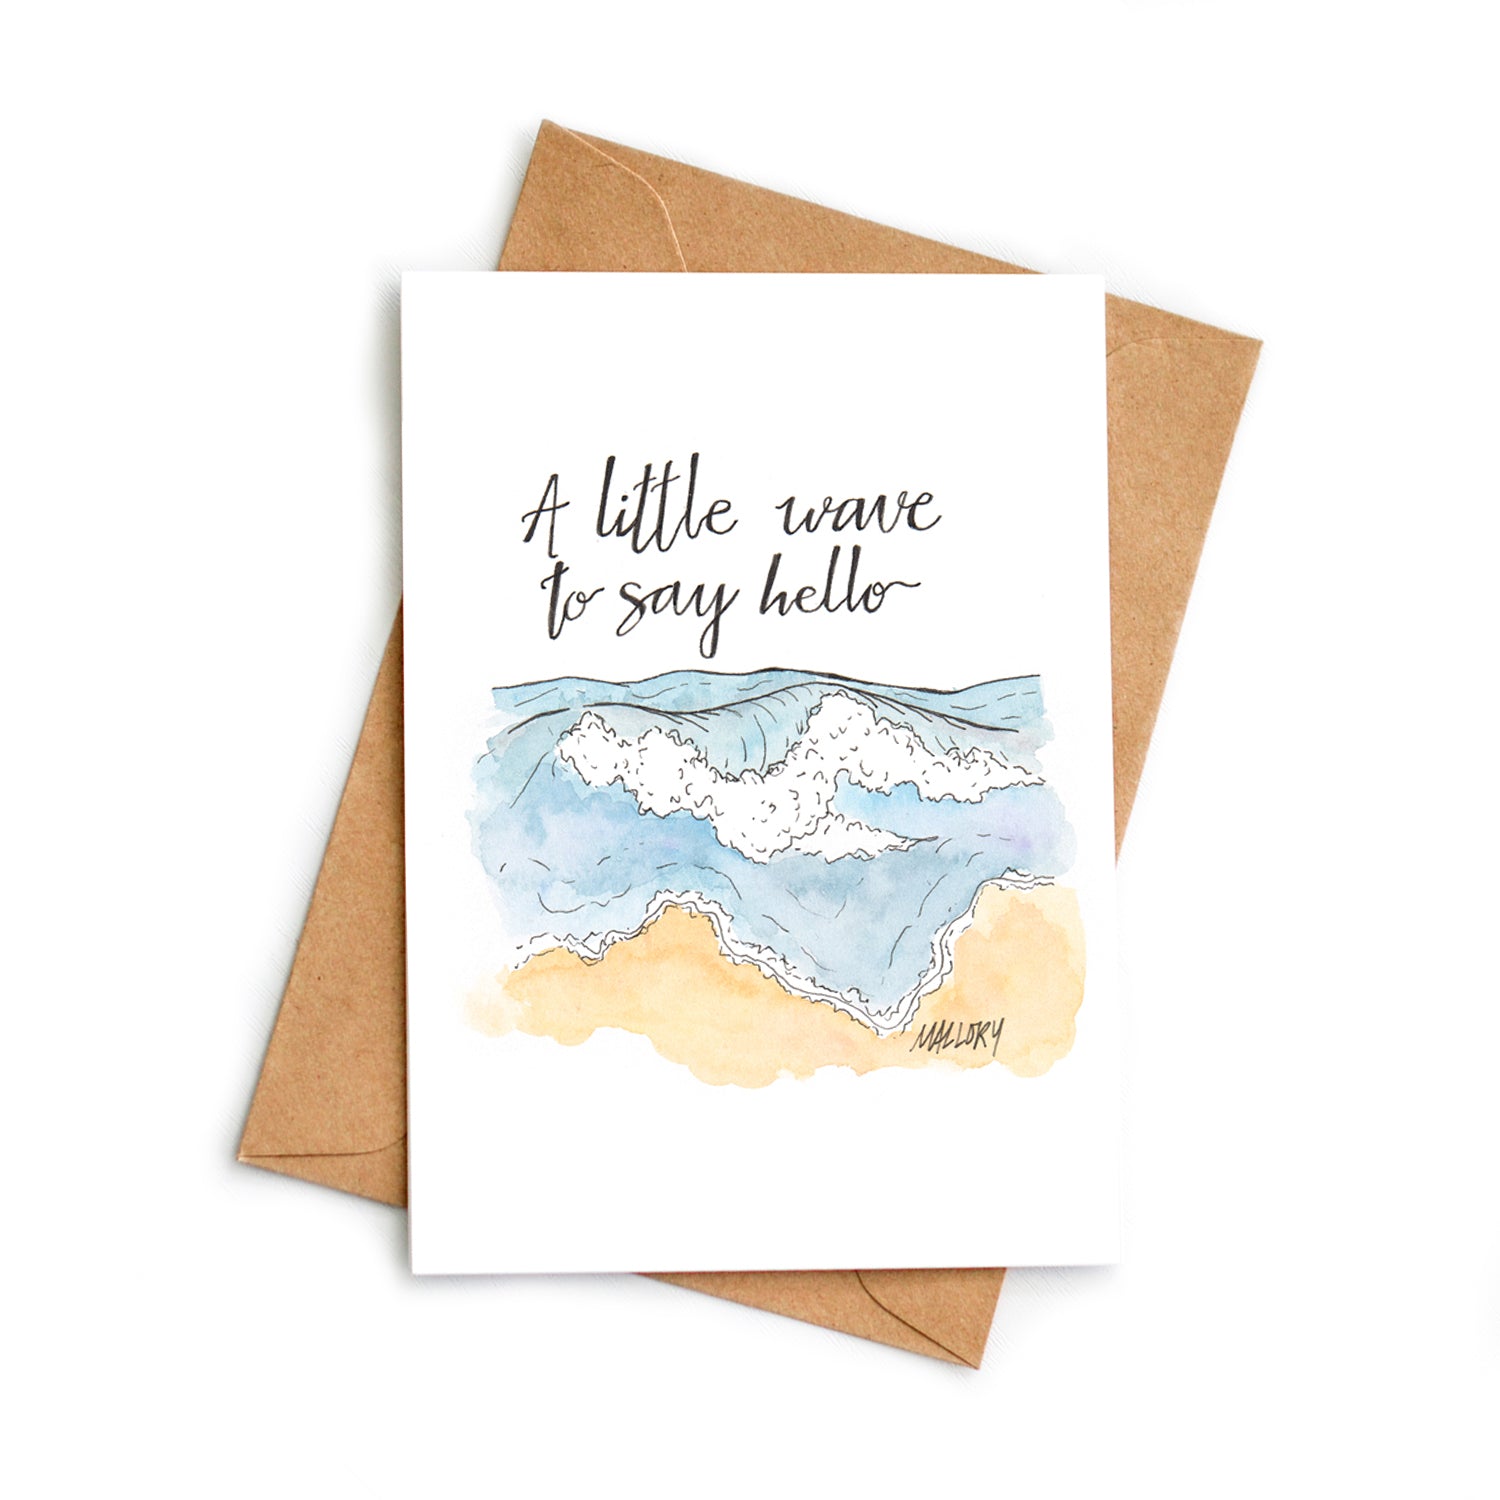 Mockup of an anytime greeting card with a handmade illustration of a wave on a beach. Written on the card is, "A little wave to say hello".